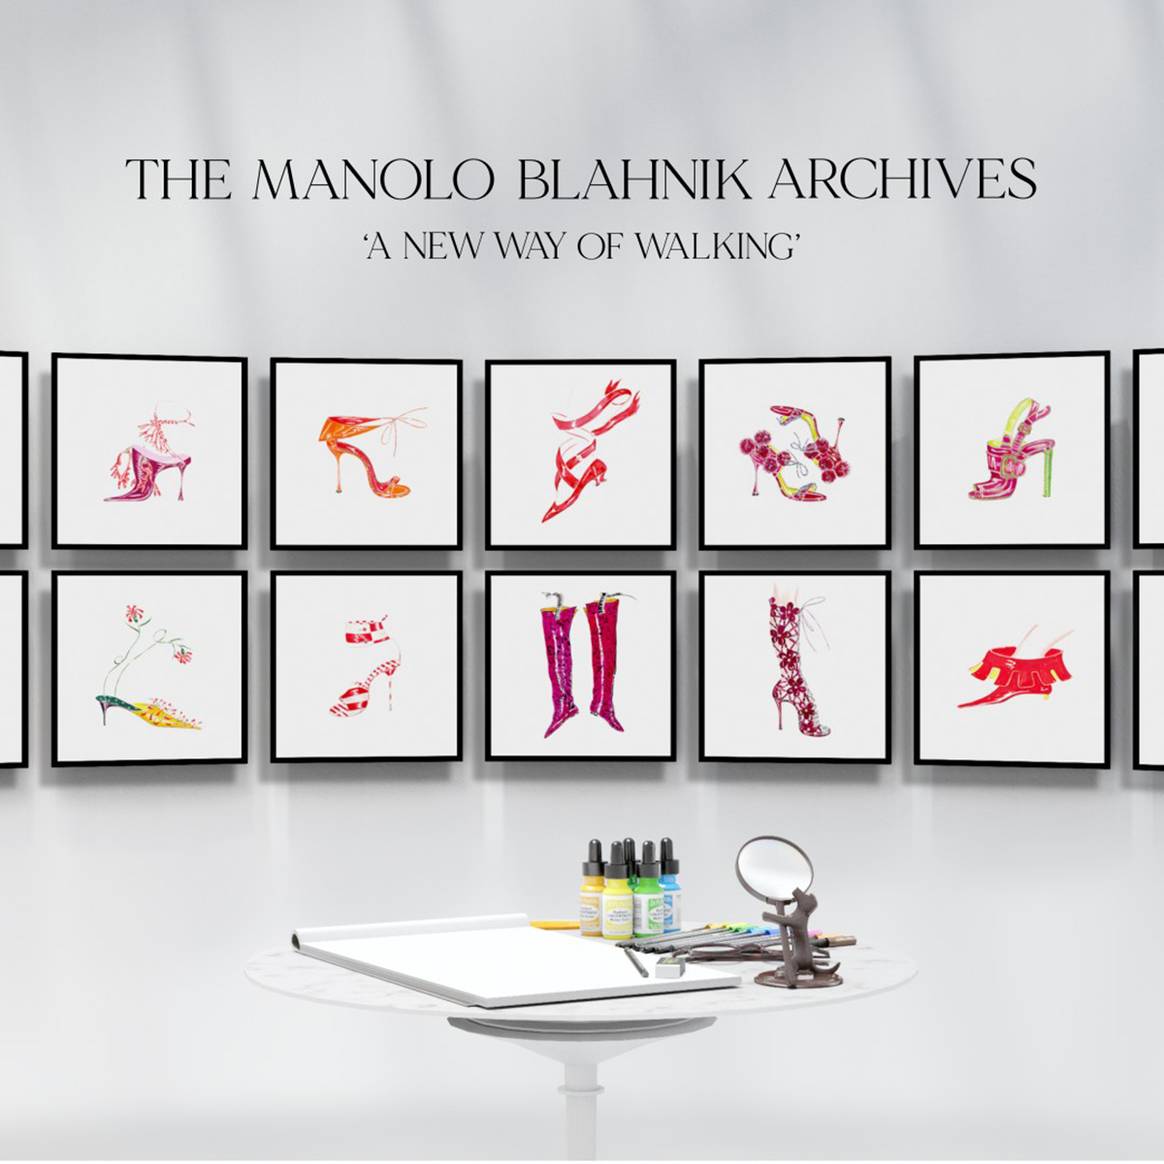 Photo Credits: The Manolo Blahnik Archives: A New Way of Walking.